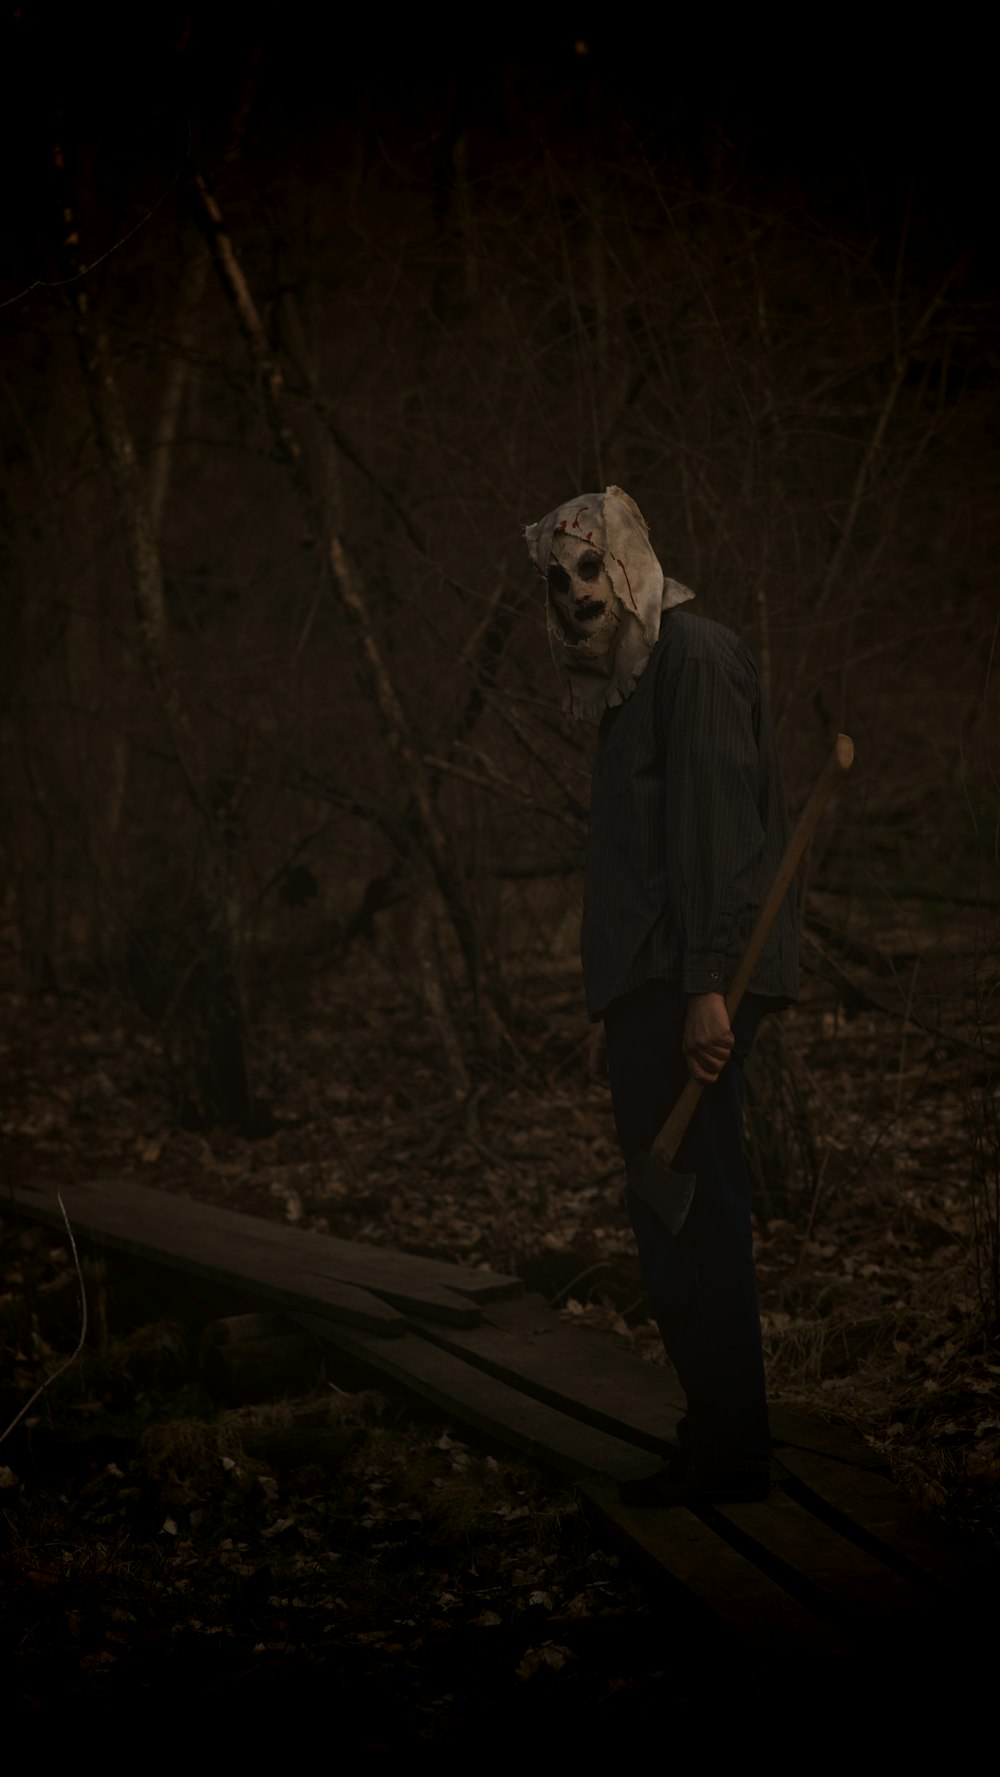 a man in a scary mask holding a stick